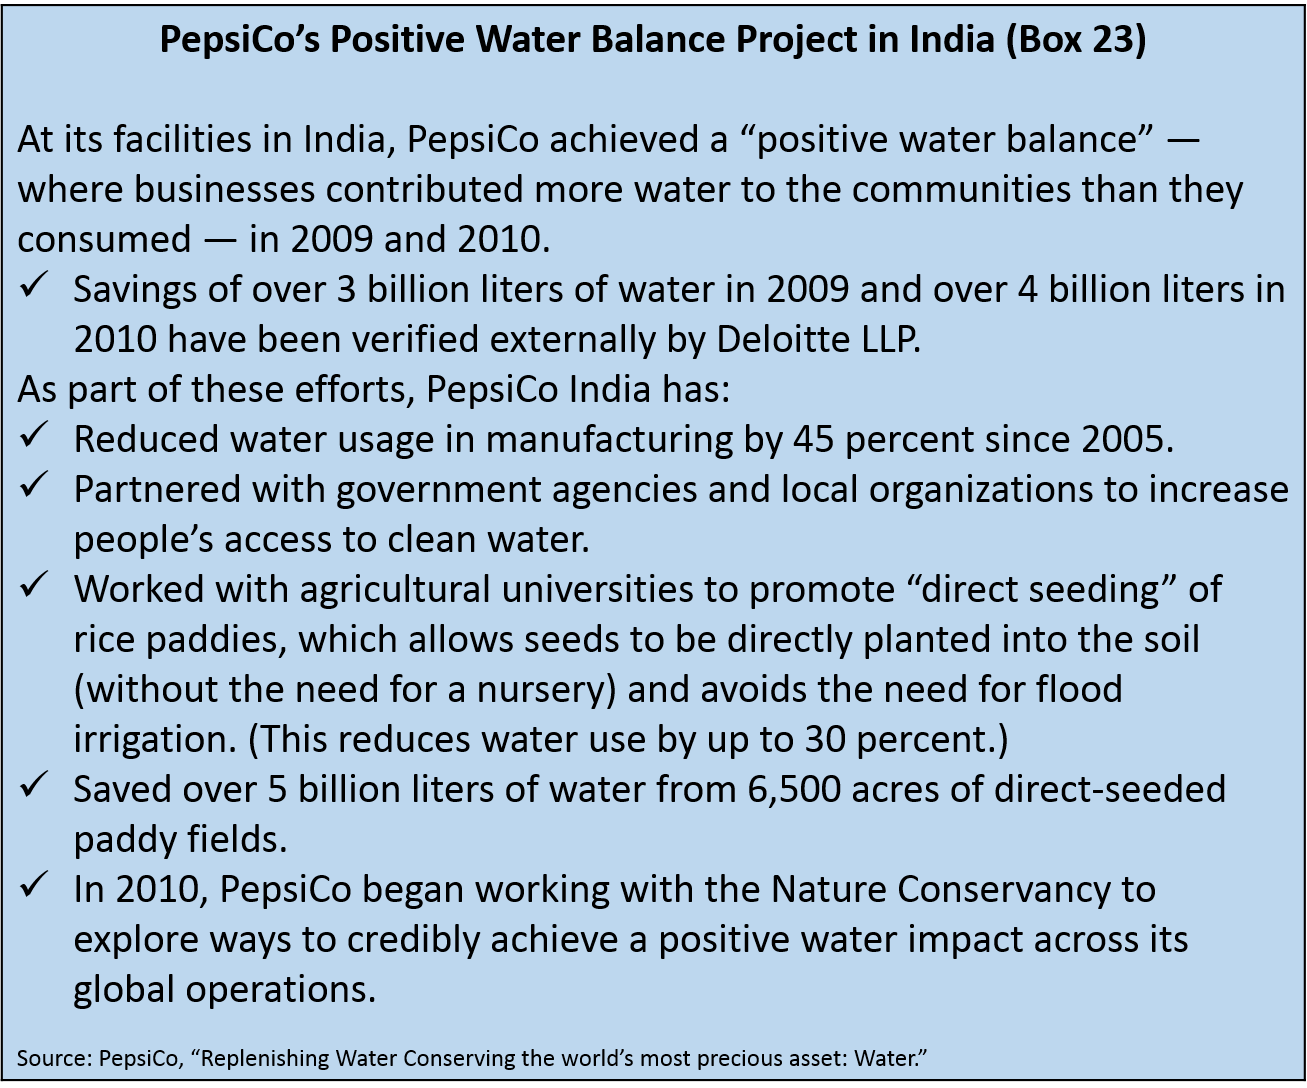 PepsiCo’s Positive Water Balance Project in India (Box 23)